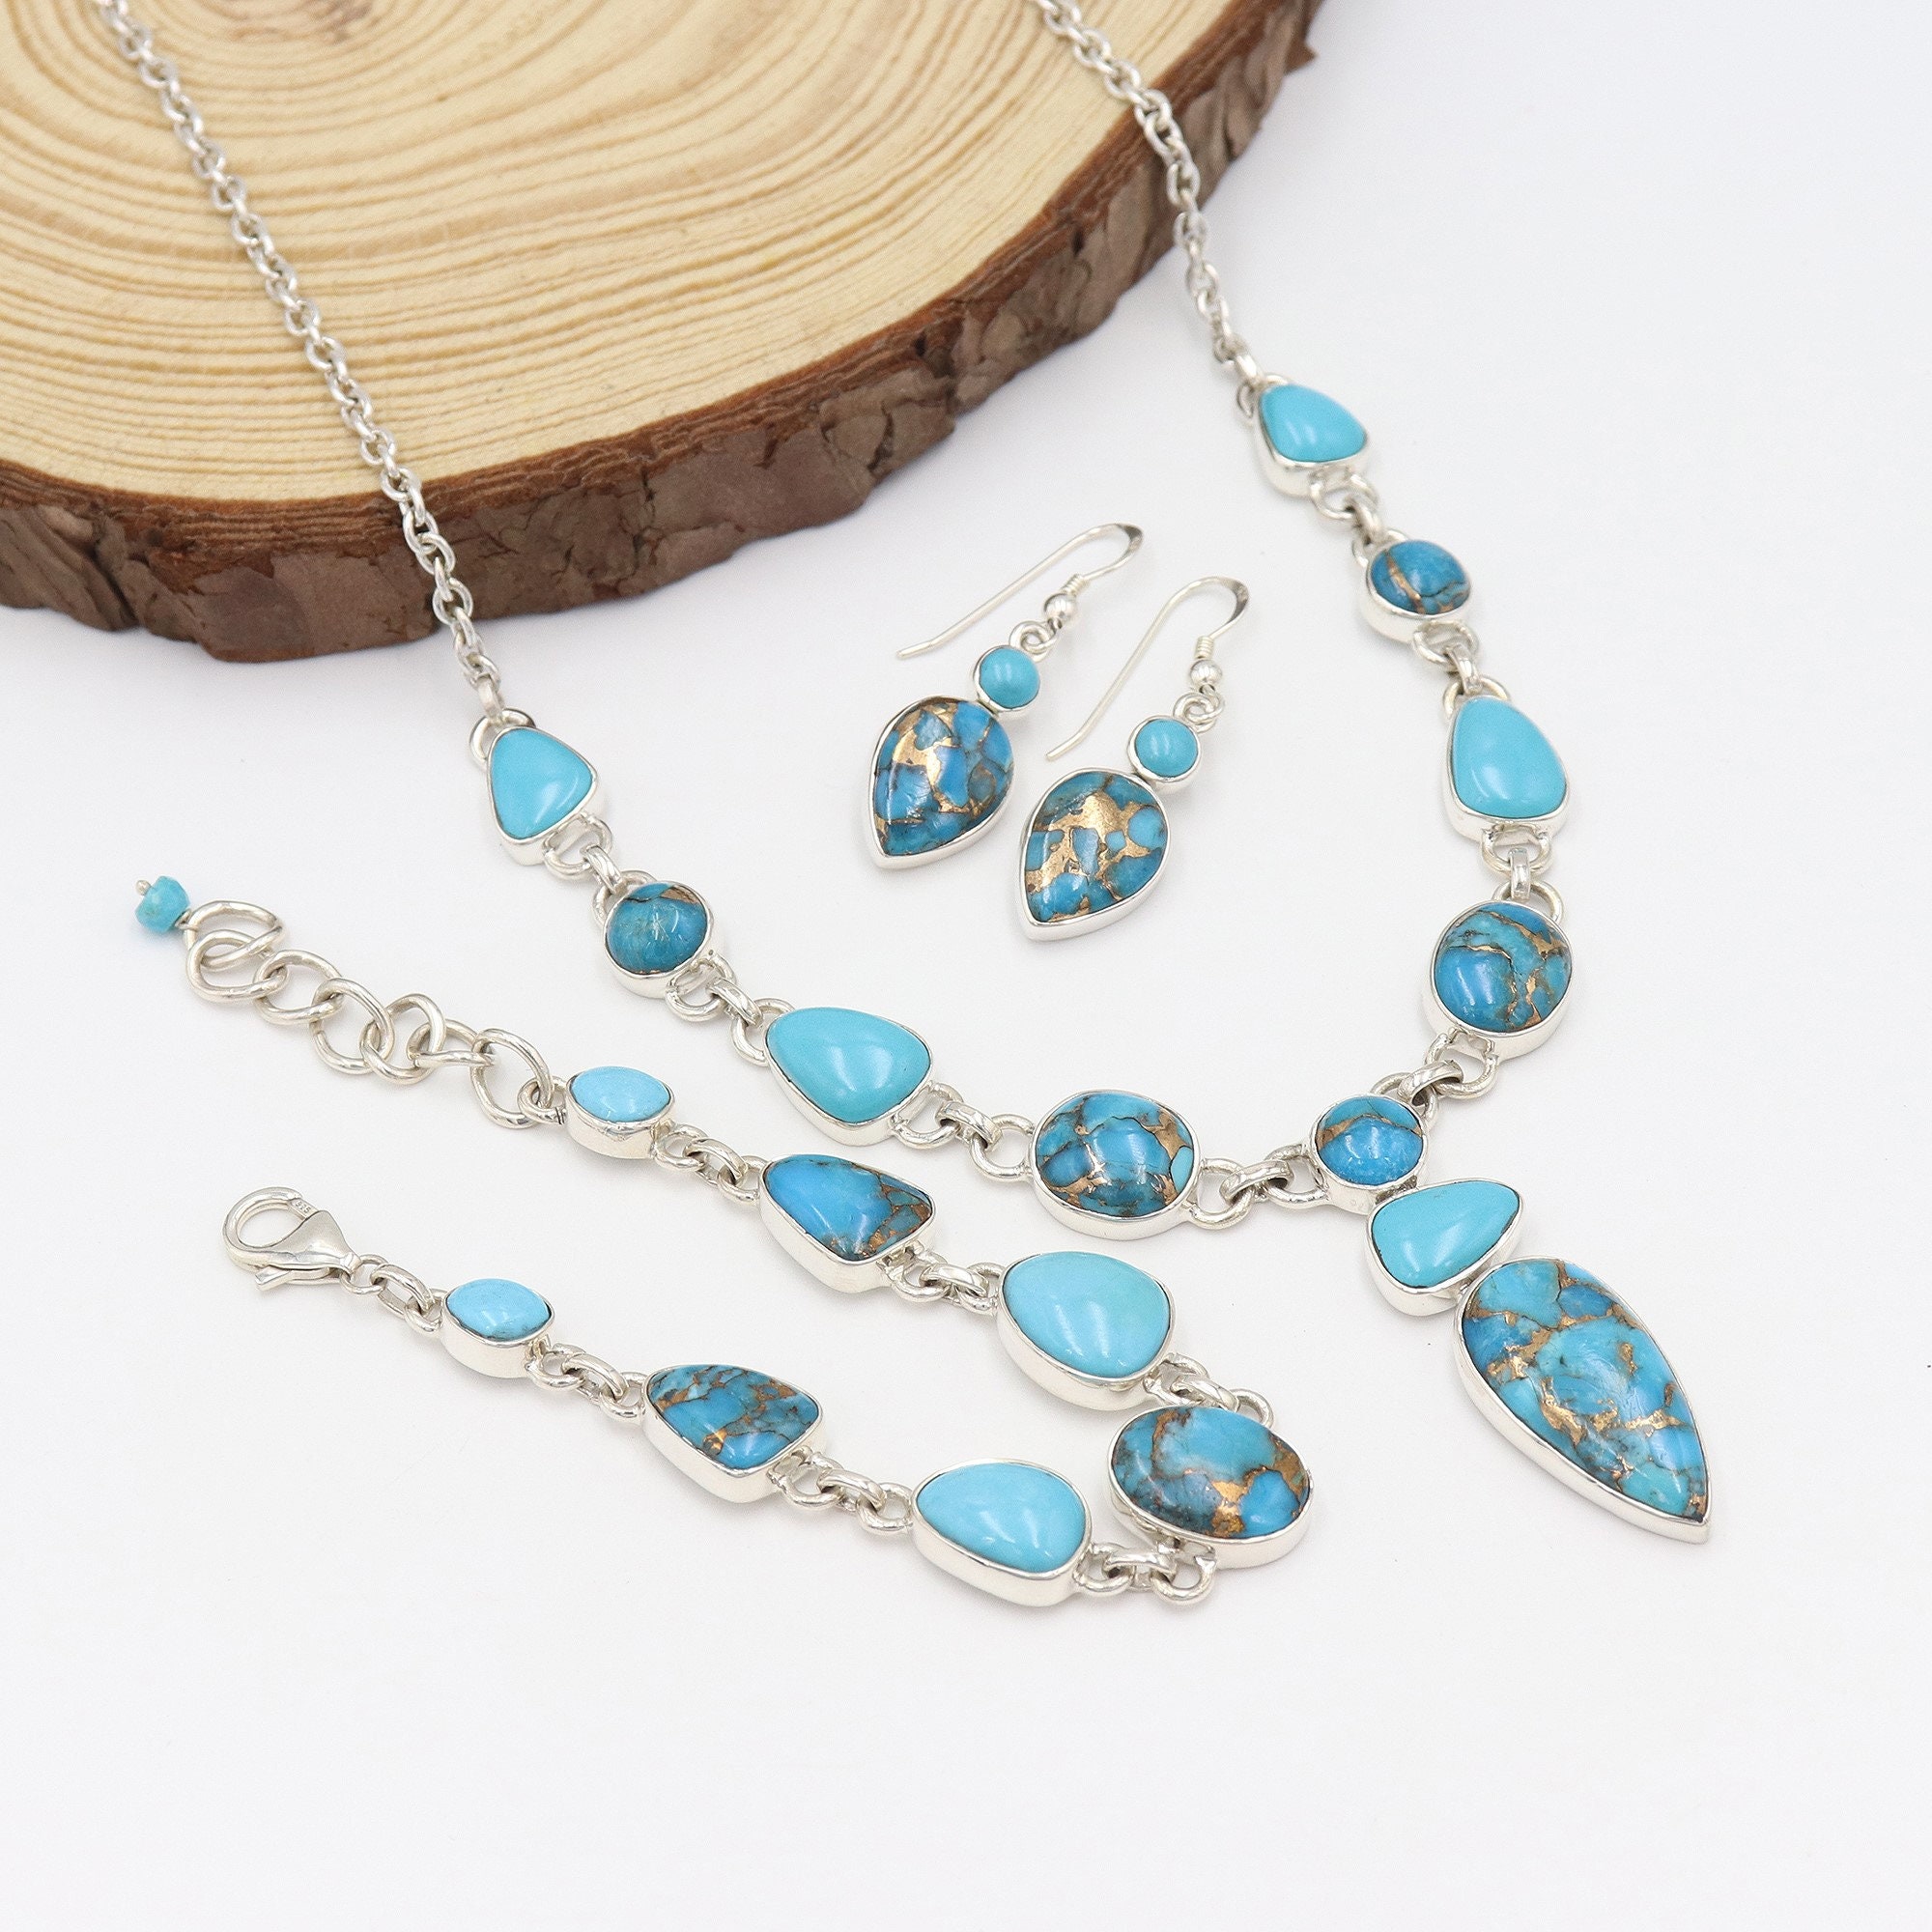 Amazon.com: Turquoise Jewelry Sets Bohemian Pendant Necklace Earrings  Western Costume Jewelry for Women Girls (Blue C) : Clothing, Shoes & Jewelry